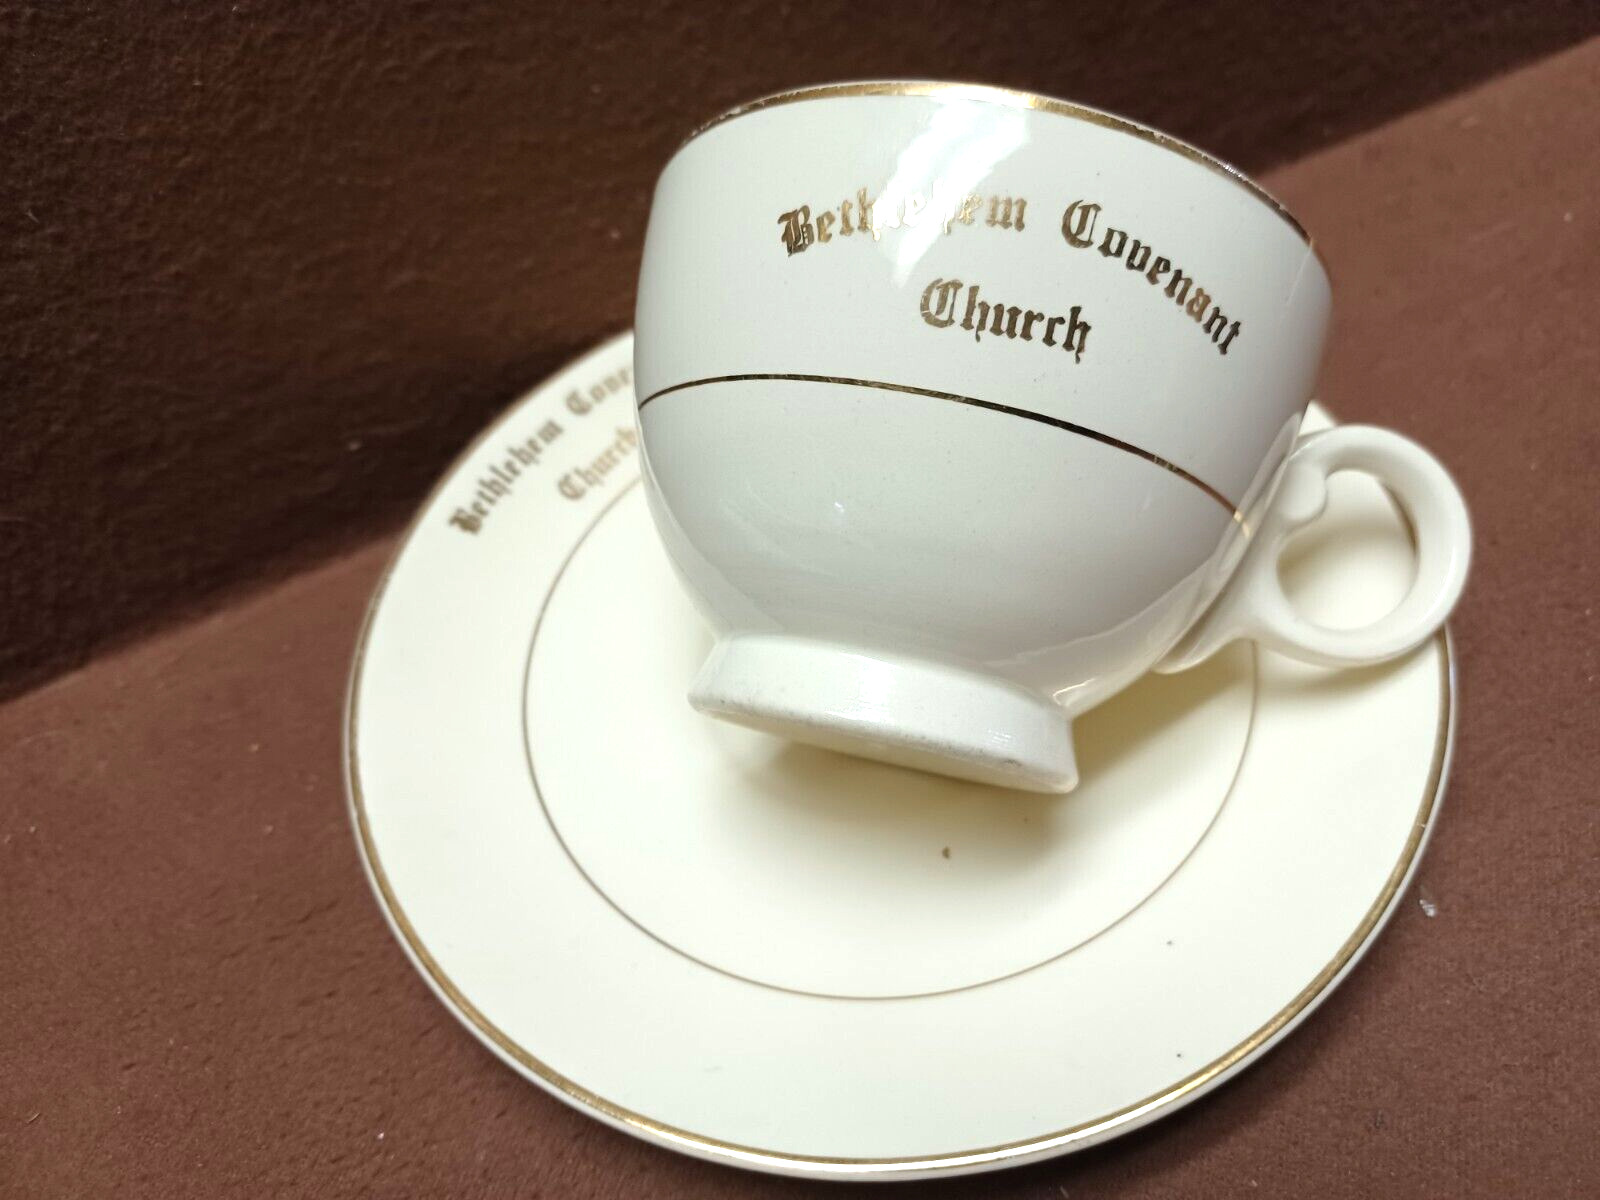 TAYLOR SMITH TAYLOR Cup and SAUCER SET CHURCH Advertising BETHLEHEM COVENANT 7 4